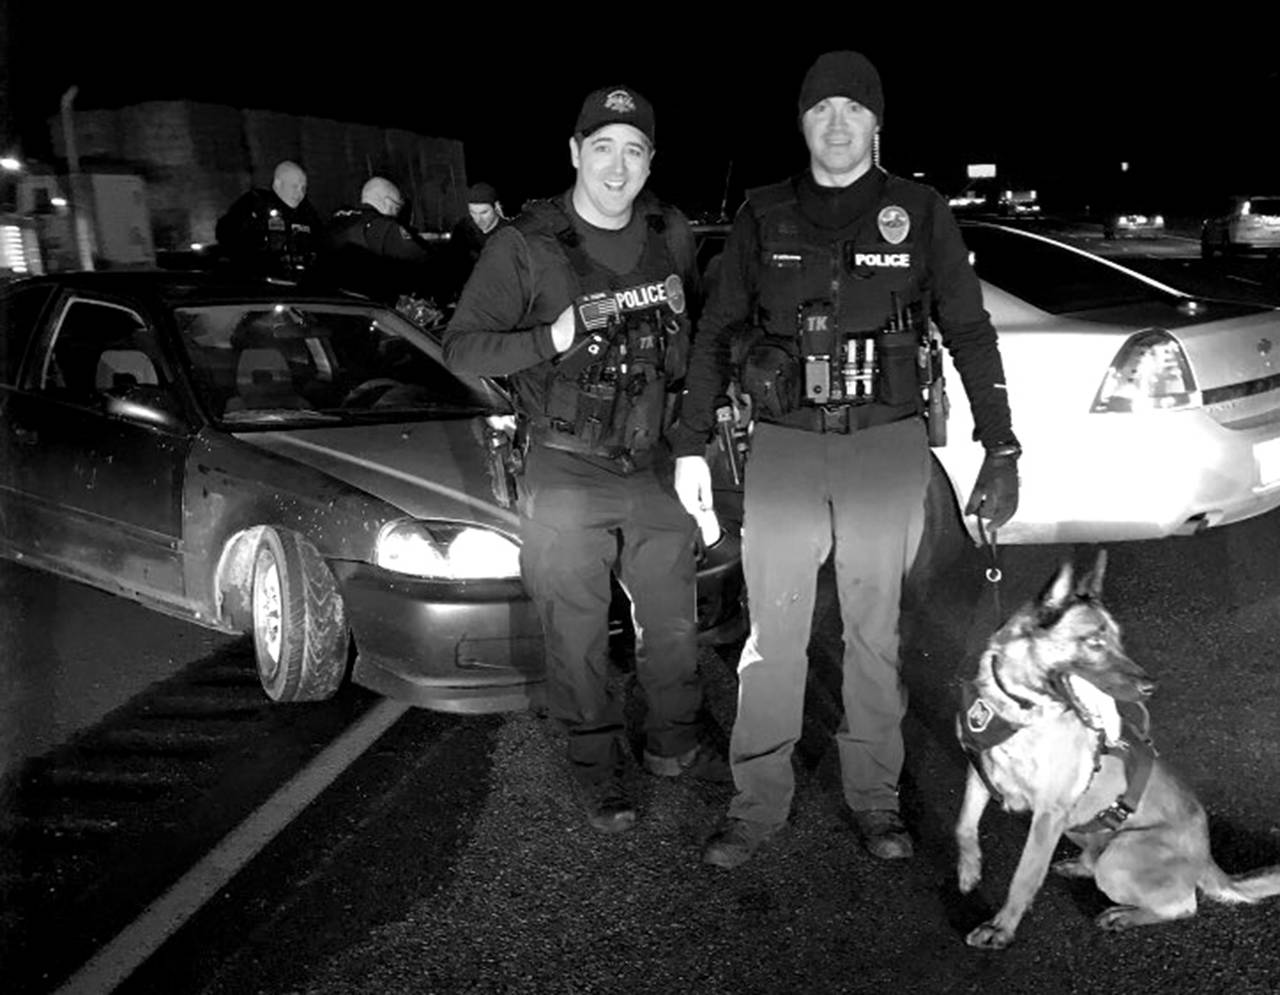 Marysville police officers Mike Young (from left), Brad Smith and K-9 Steele arrested a man Wednesday after he led them on a high-speed, wrong-way chase onto I-5. (Marysville Police Department)